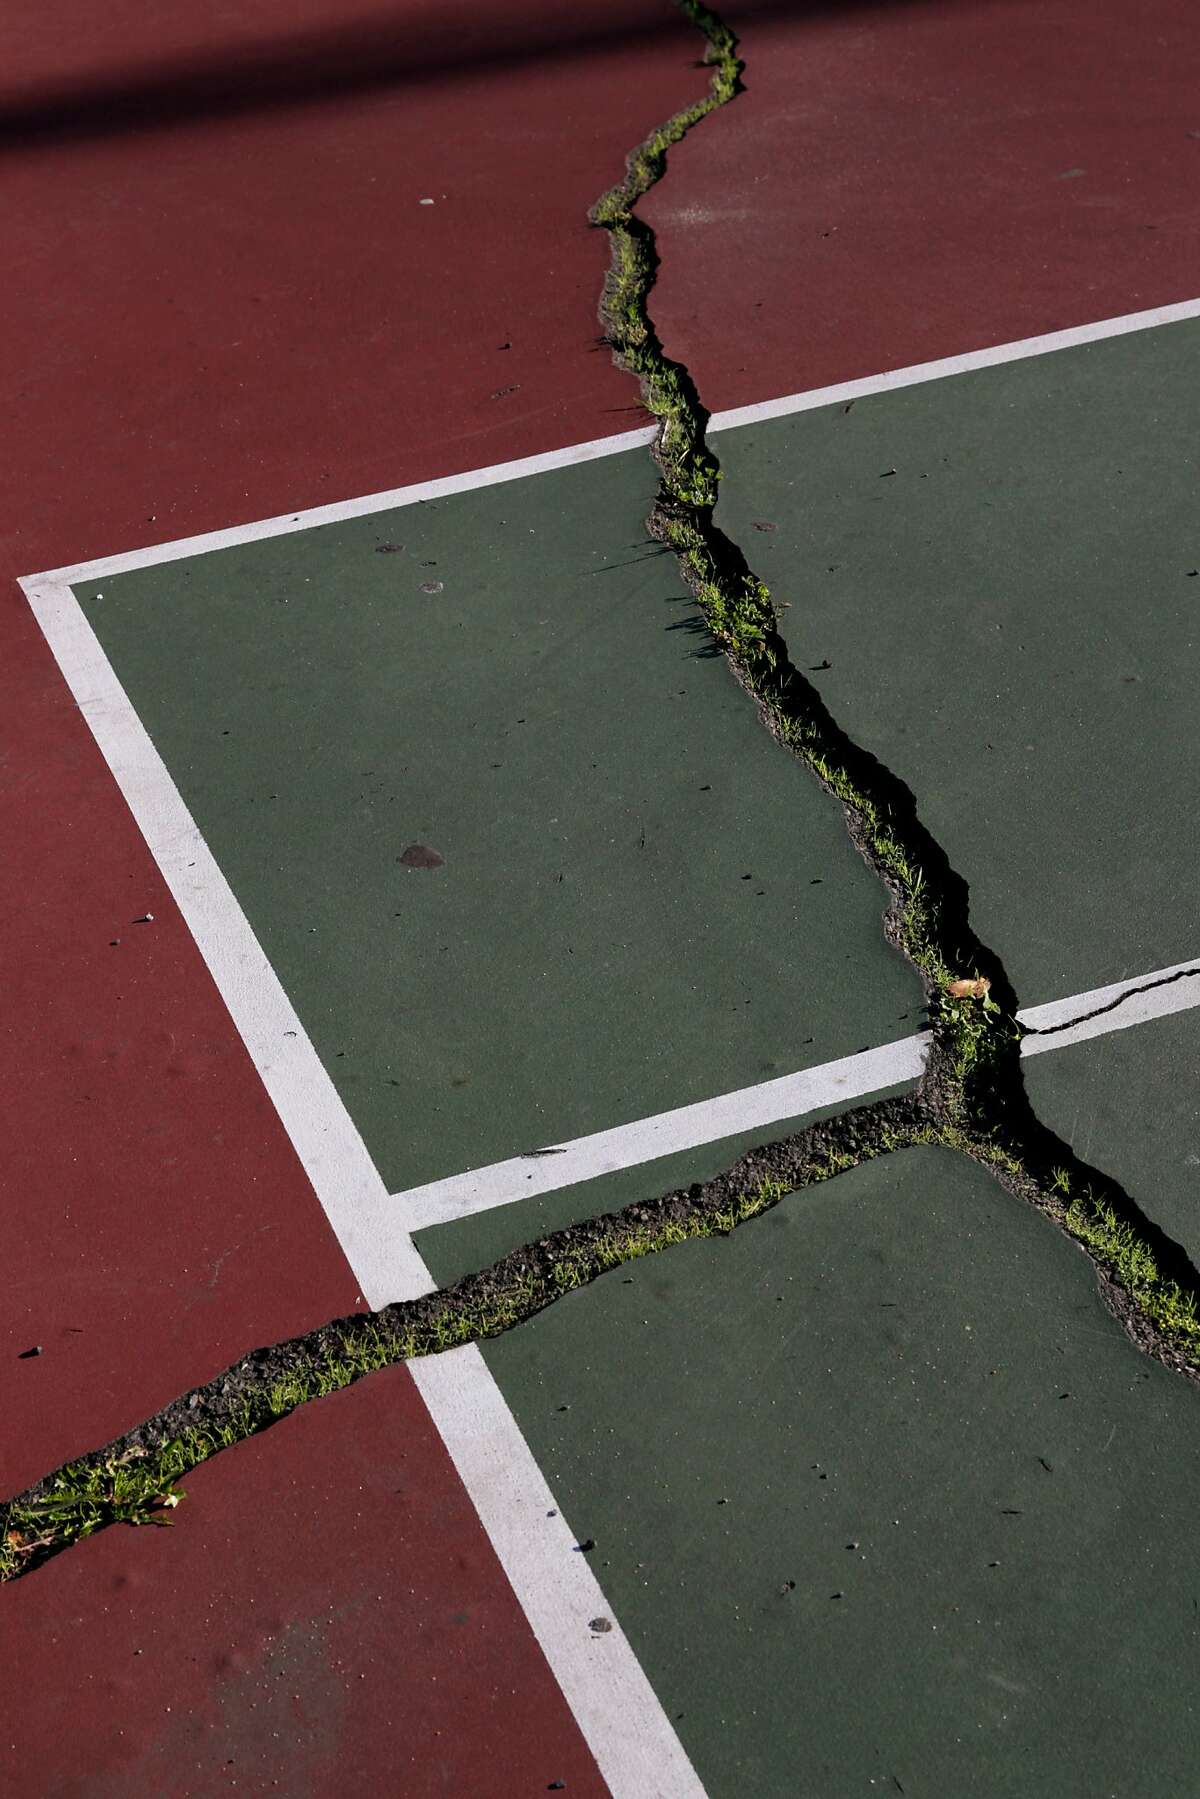 A cracked tennis court at Excelsior Playground on Wednesday, Nov. 2, 2016 in San Francisco, Calif.